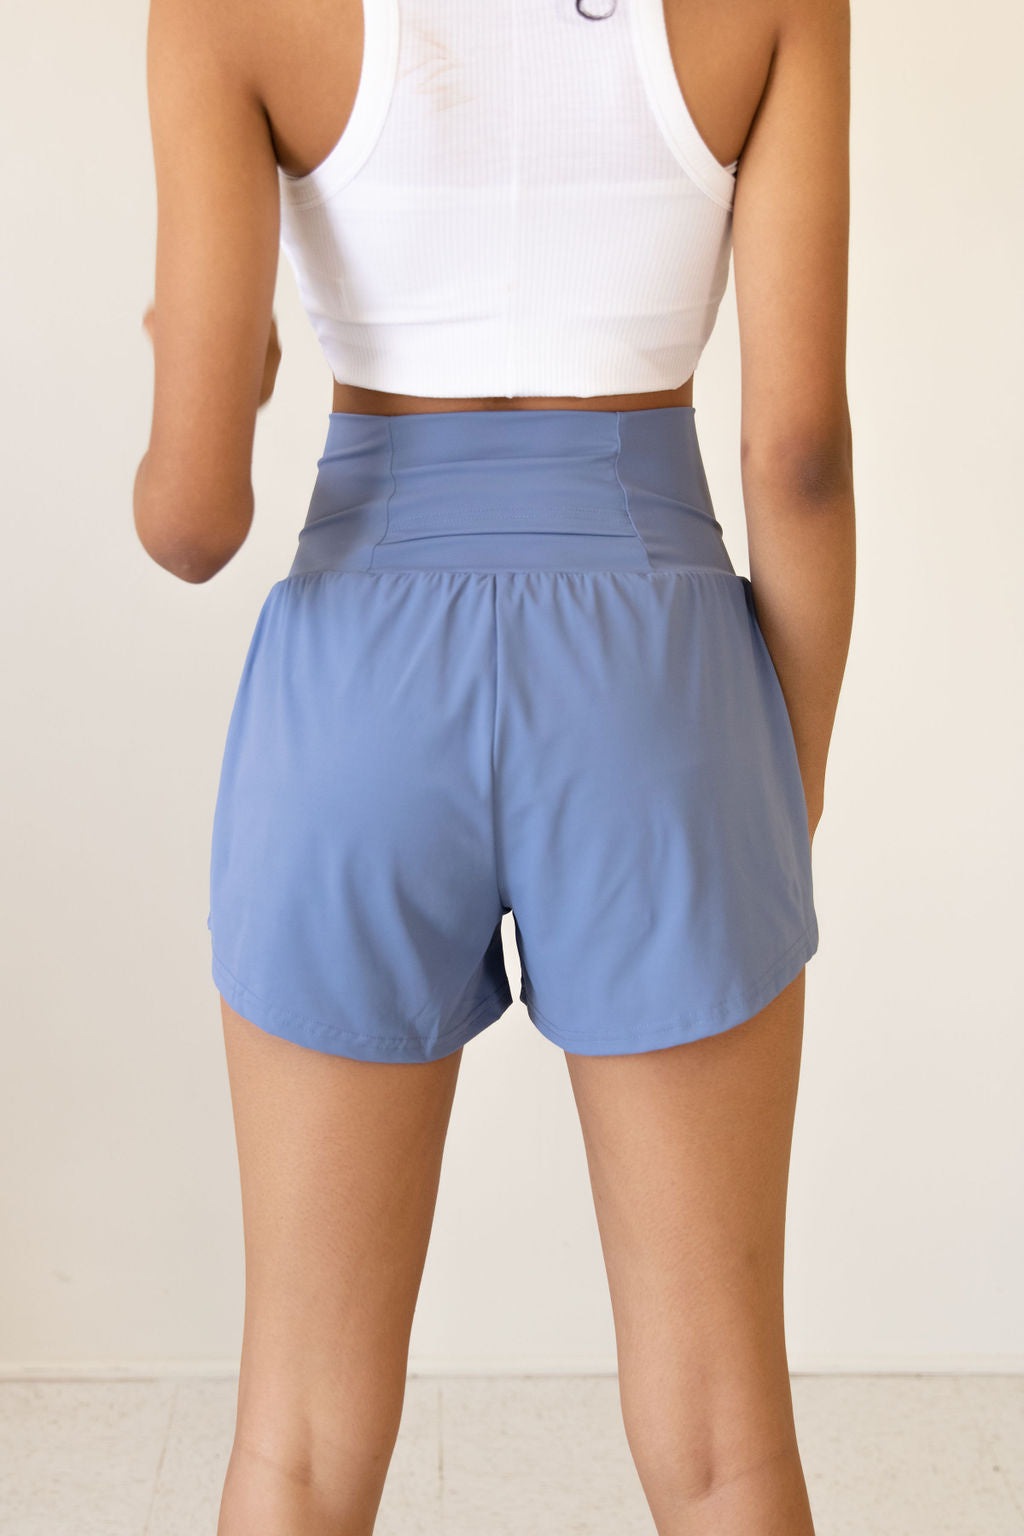 Lucky Girl Activewear Shorts by For Good